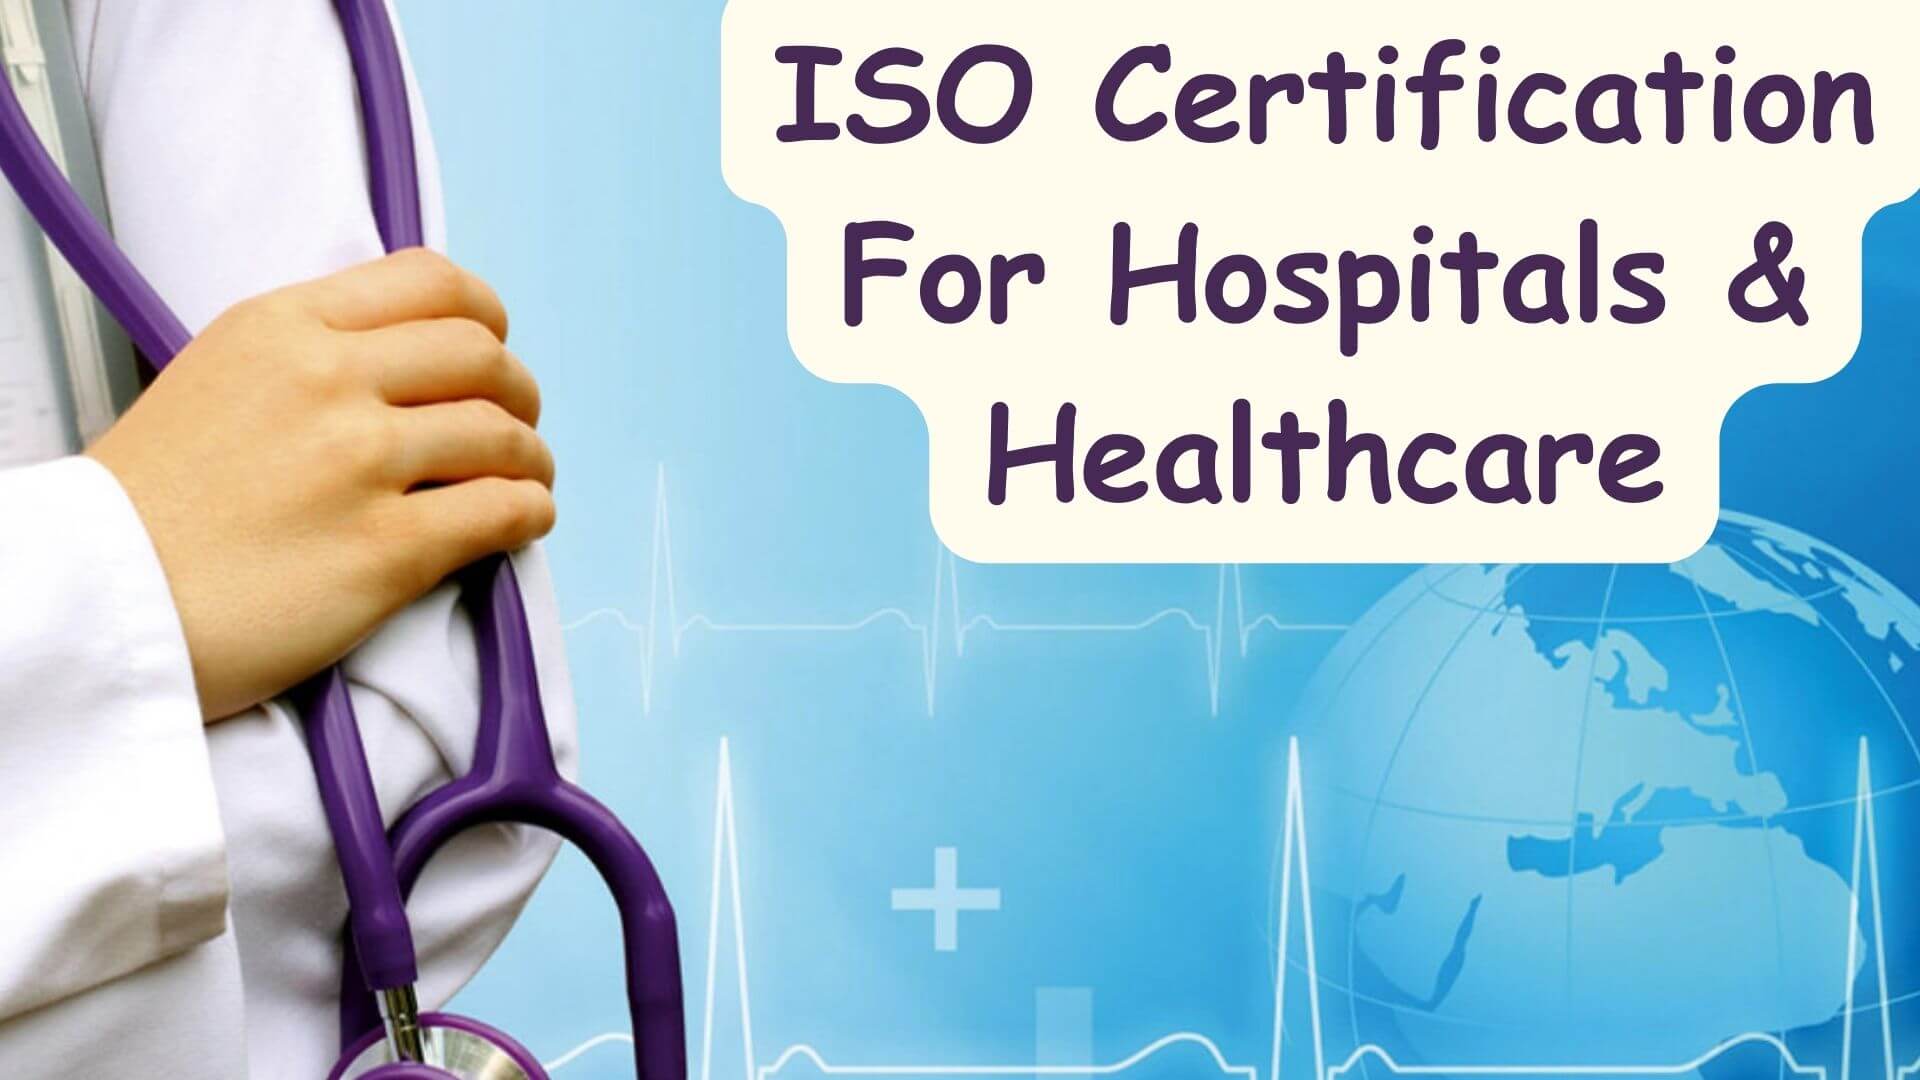 ISO Certification For Hospitals & Healthcare